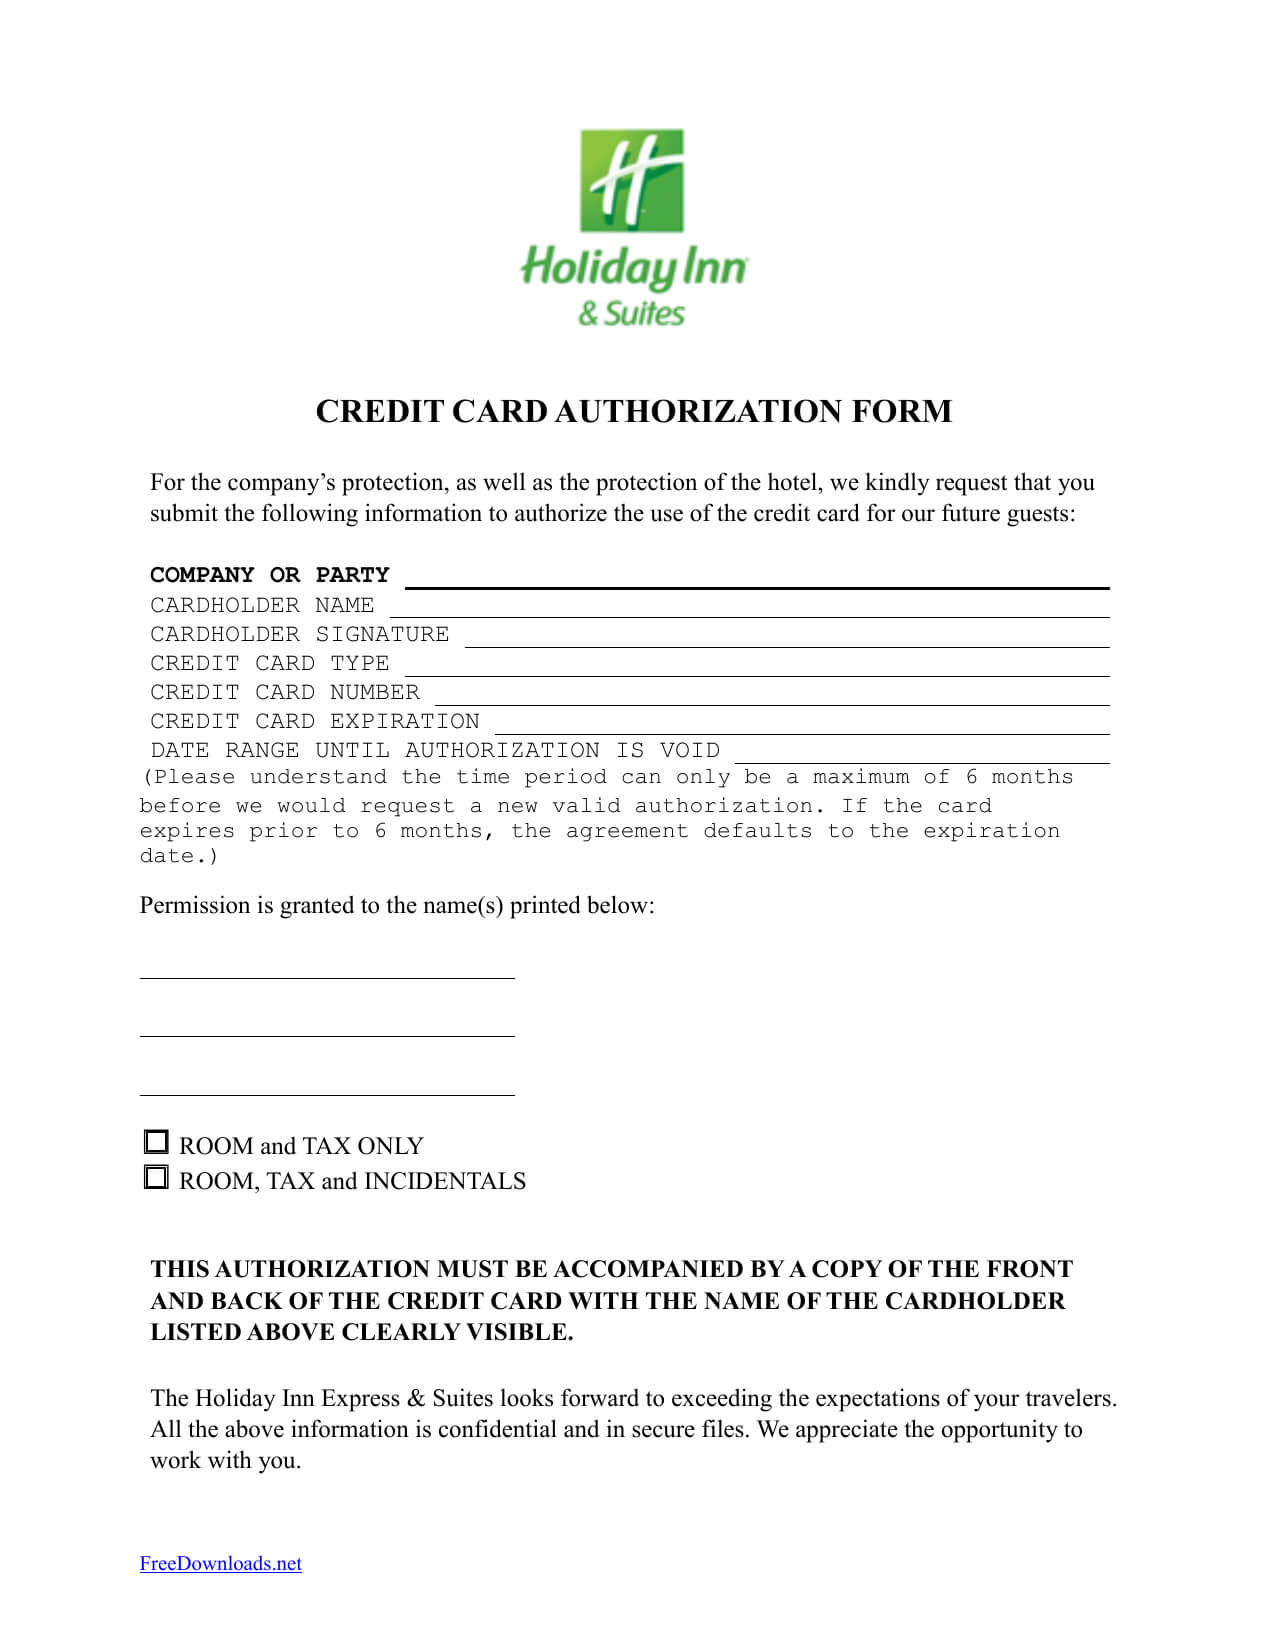 Download Holiday Inn Credit Card Authorization Form Template Regarding Hotel Credit Card Authorization Form Template